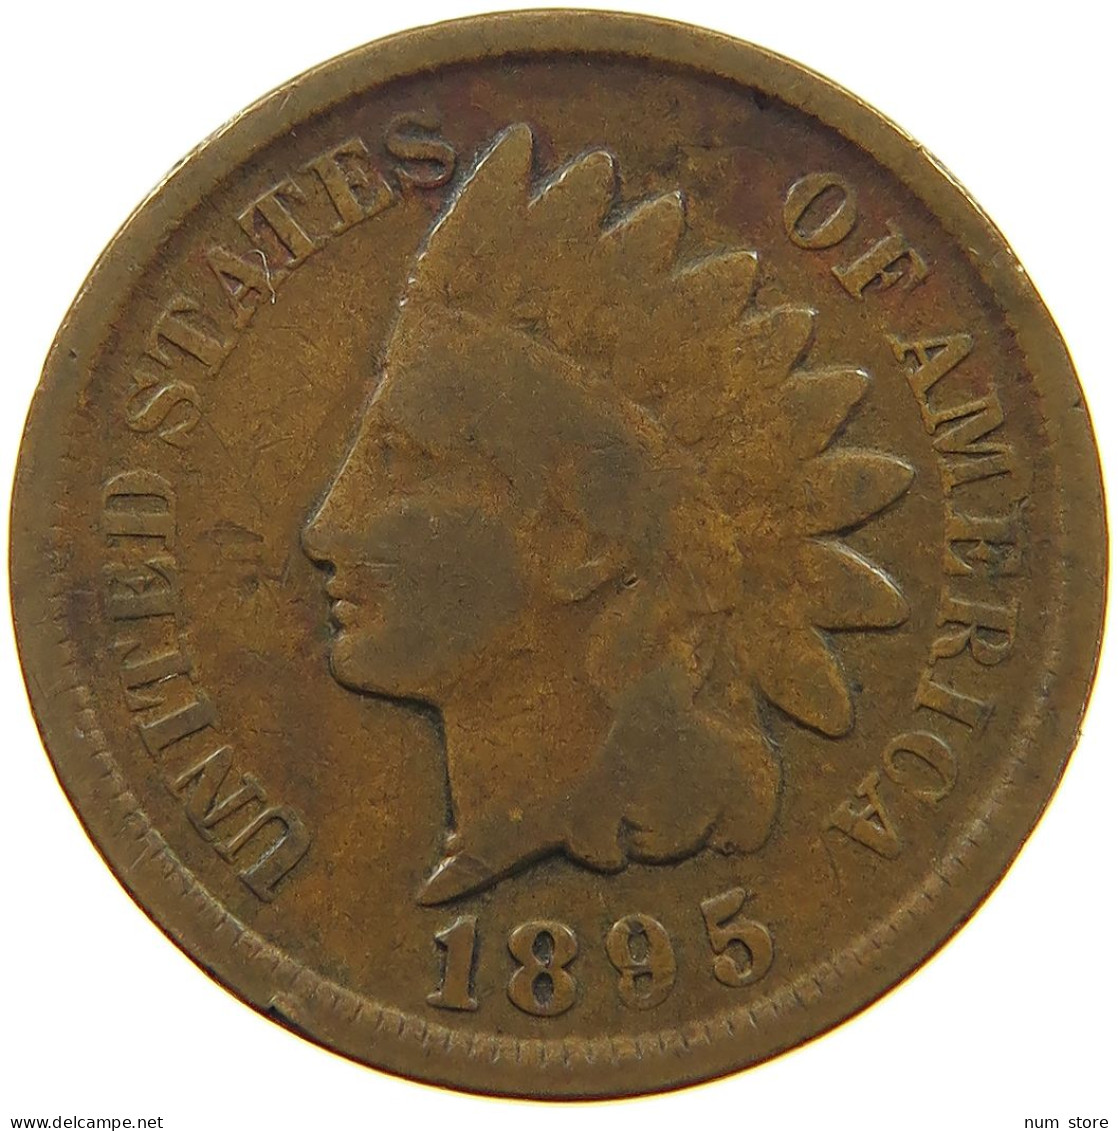 UNITED STATES OF AMERICA CENT 1895 INDIAN HEAD #a059 0701 - 1859-1909: Indian Head